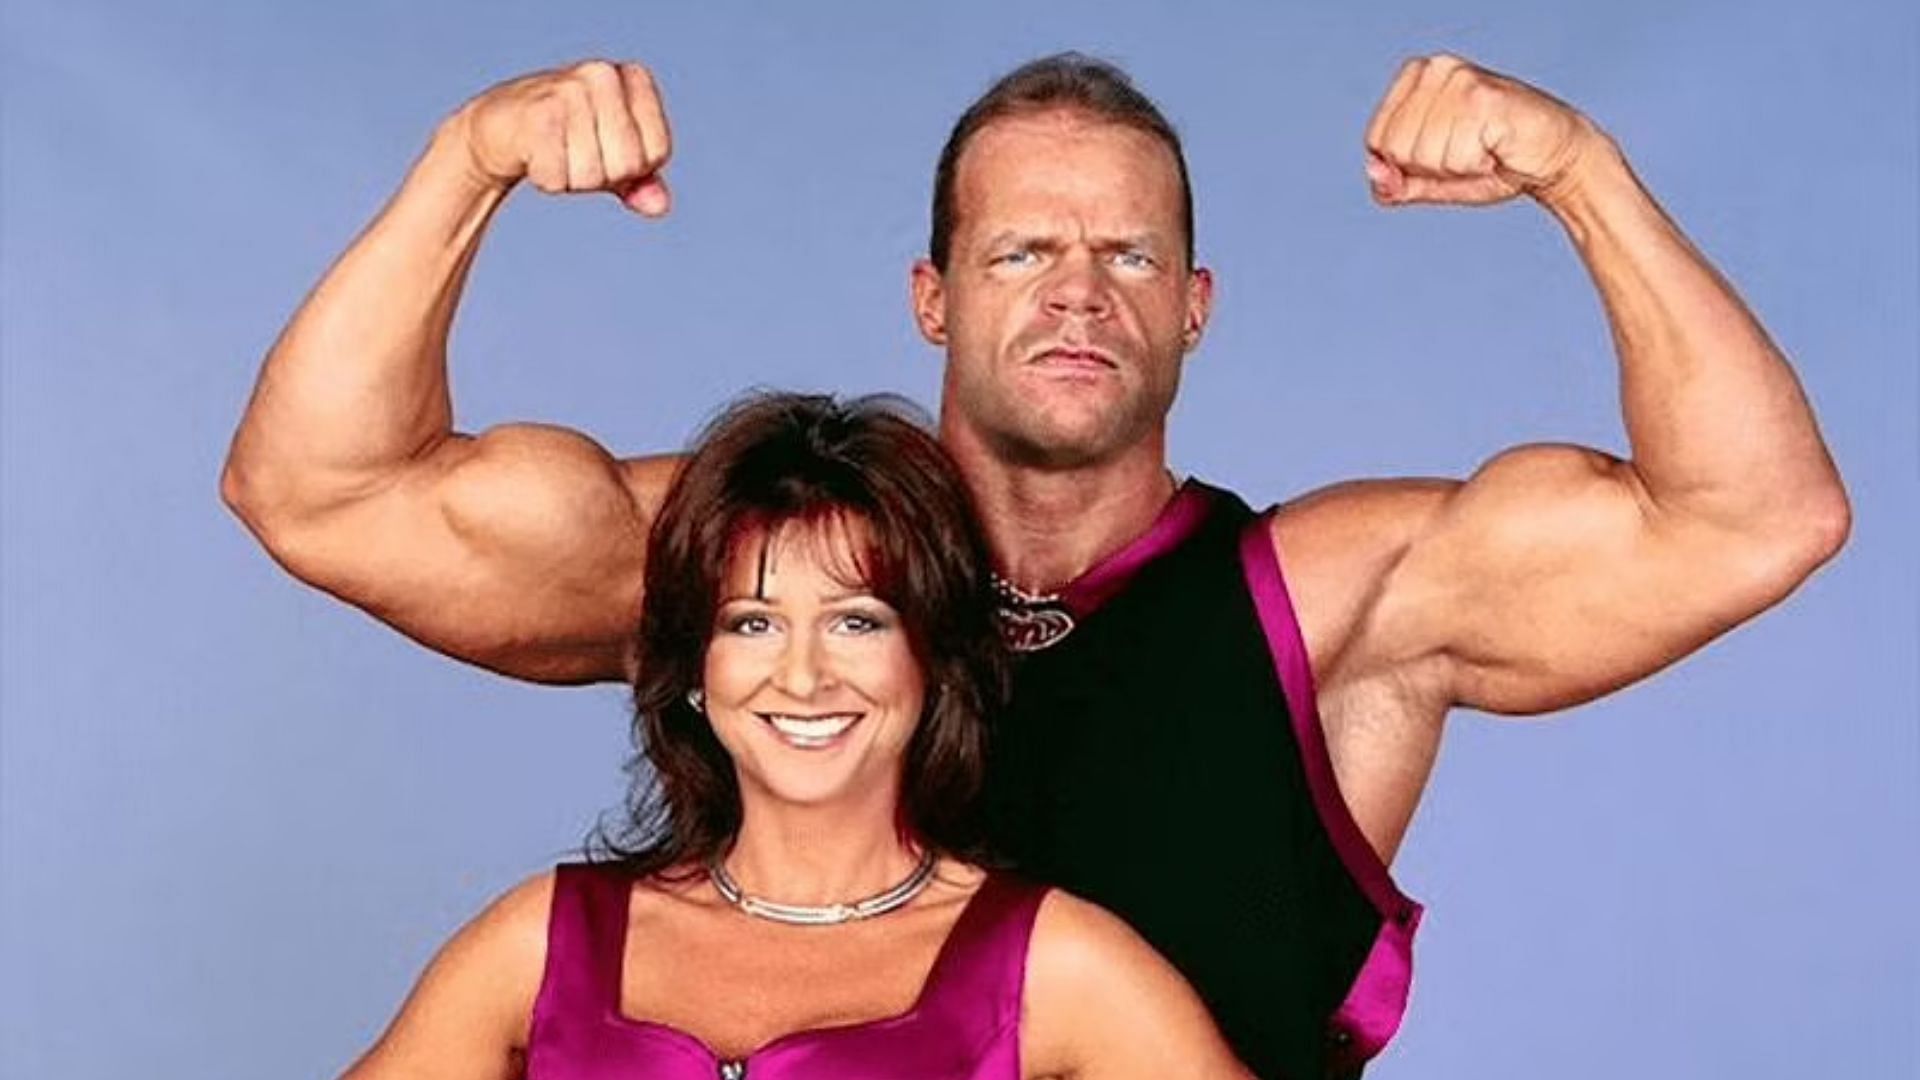 The story of Lex Luger and Miss Elizabeth is a harrowing one